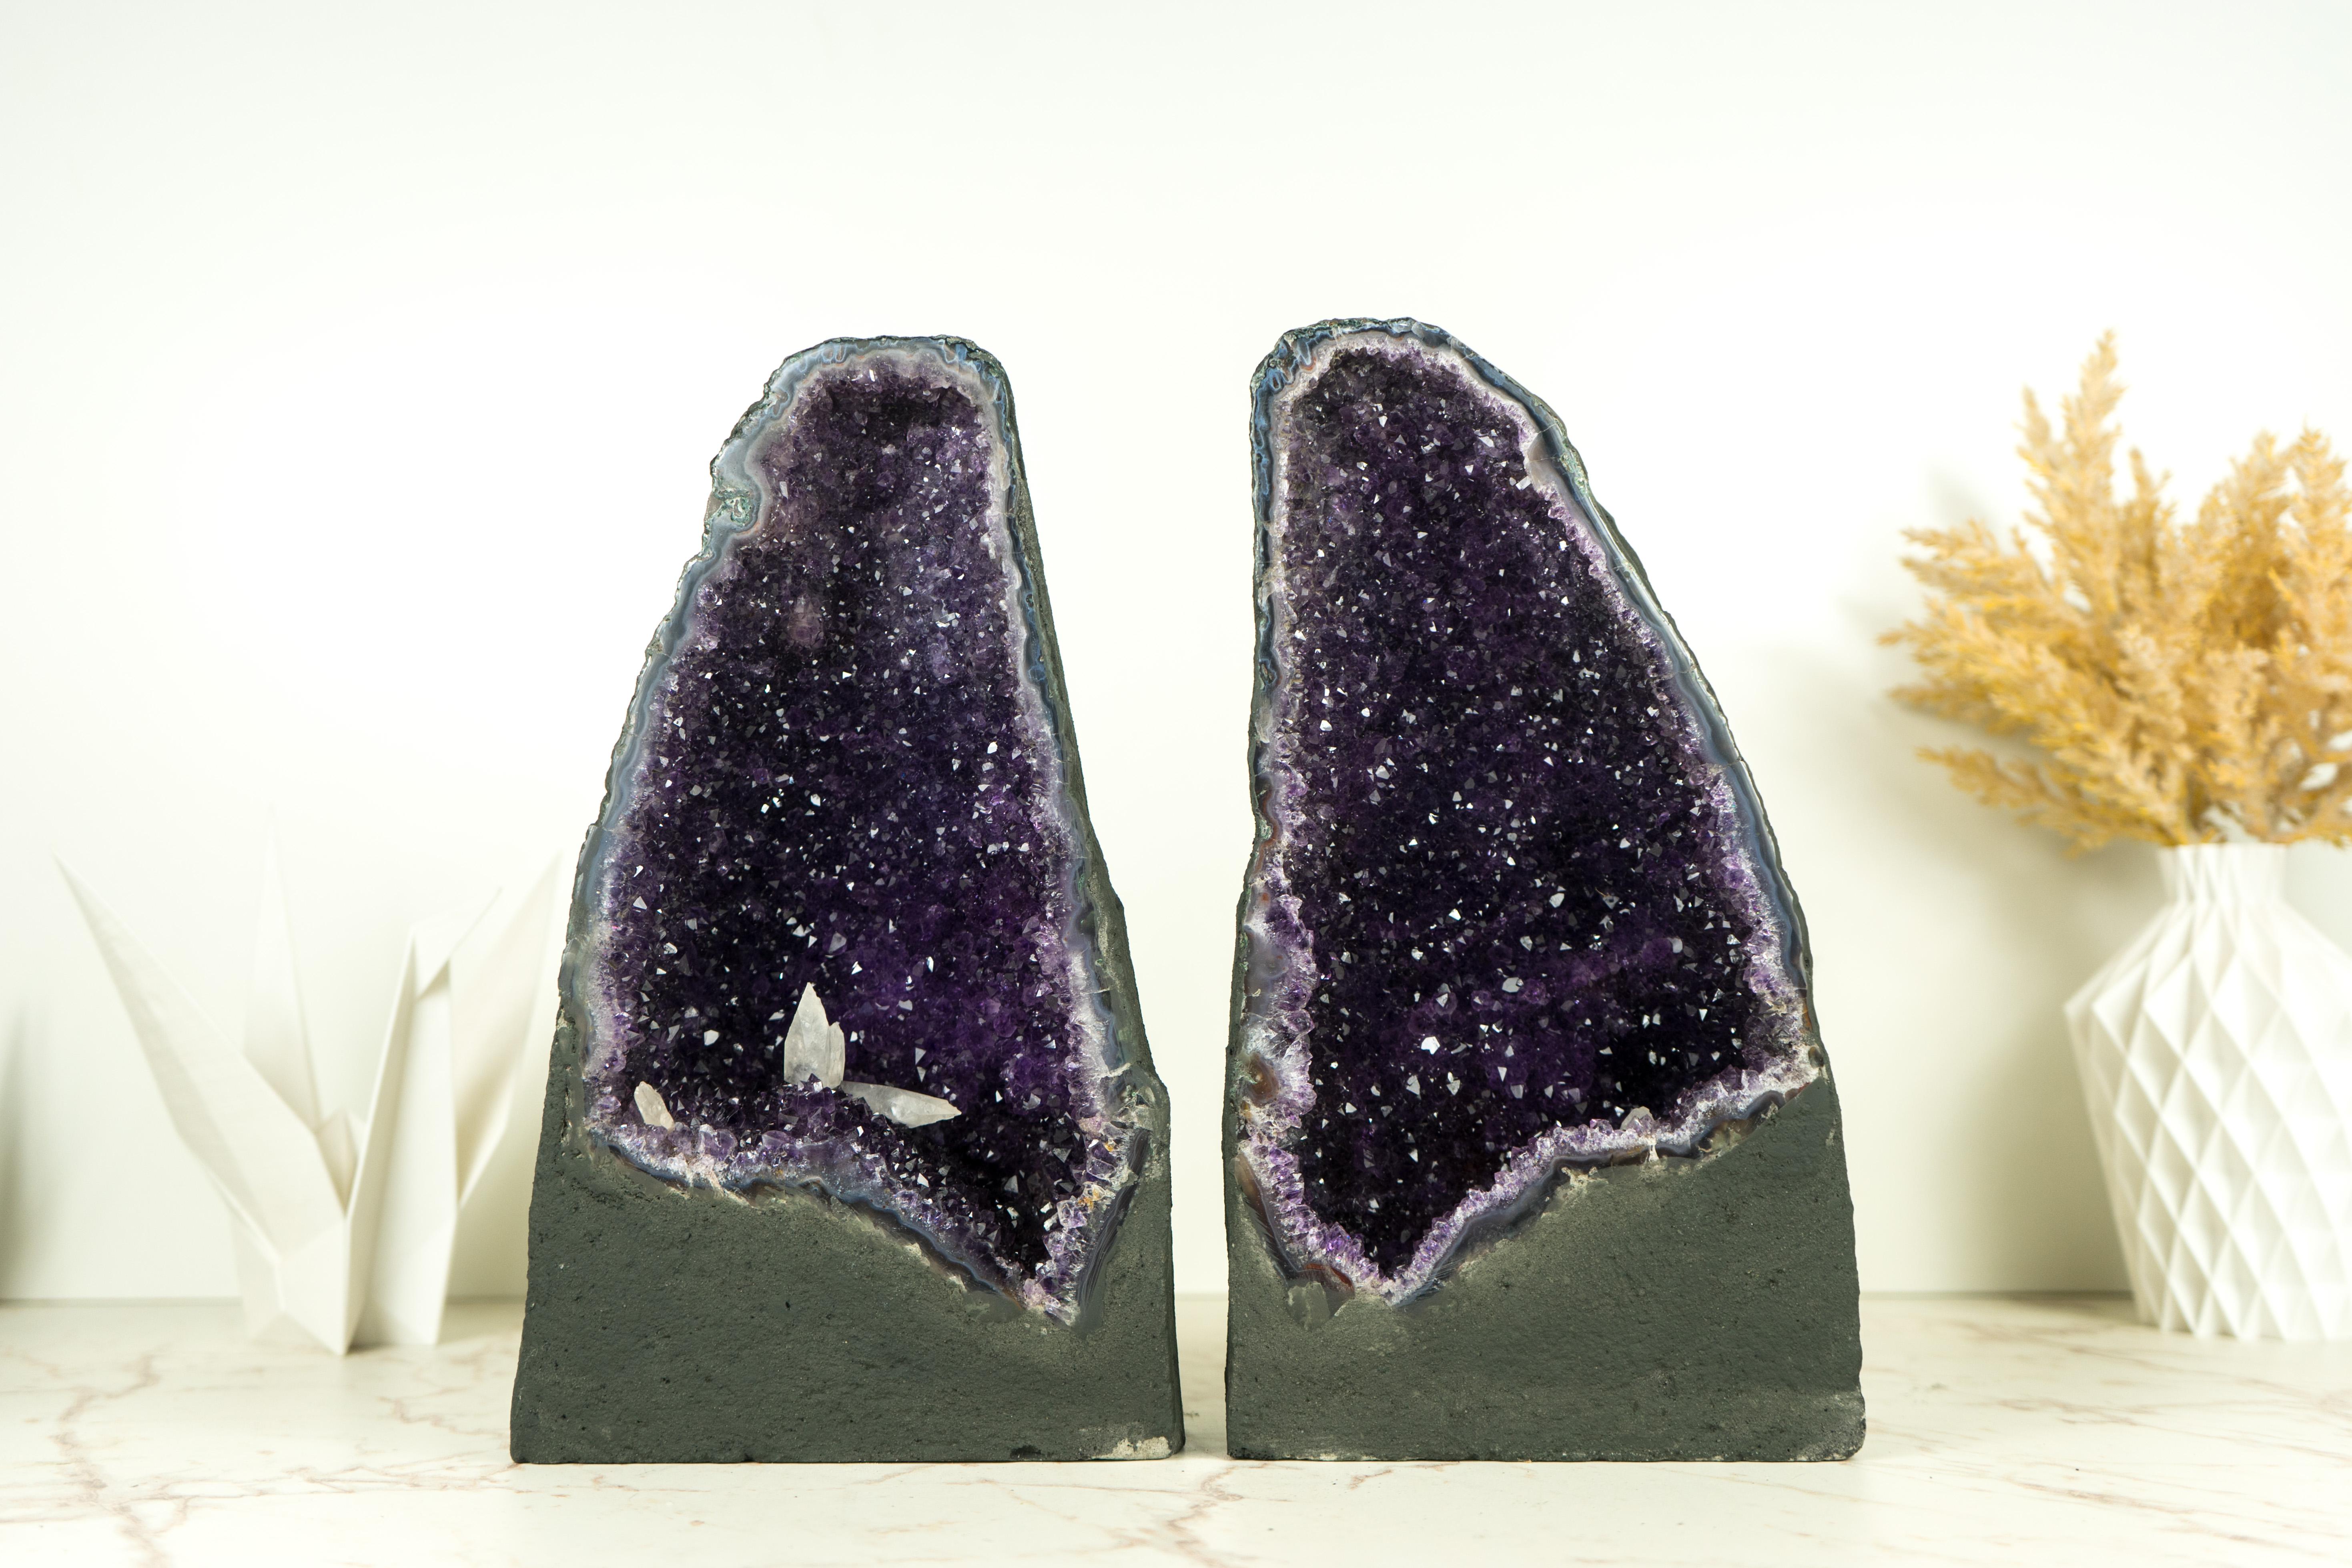 All-Natural Amethyst Geodes with Intact Calcite and Rich Purple Galaxy Amethyst  7